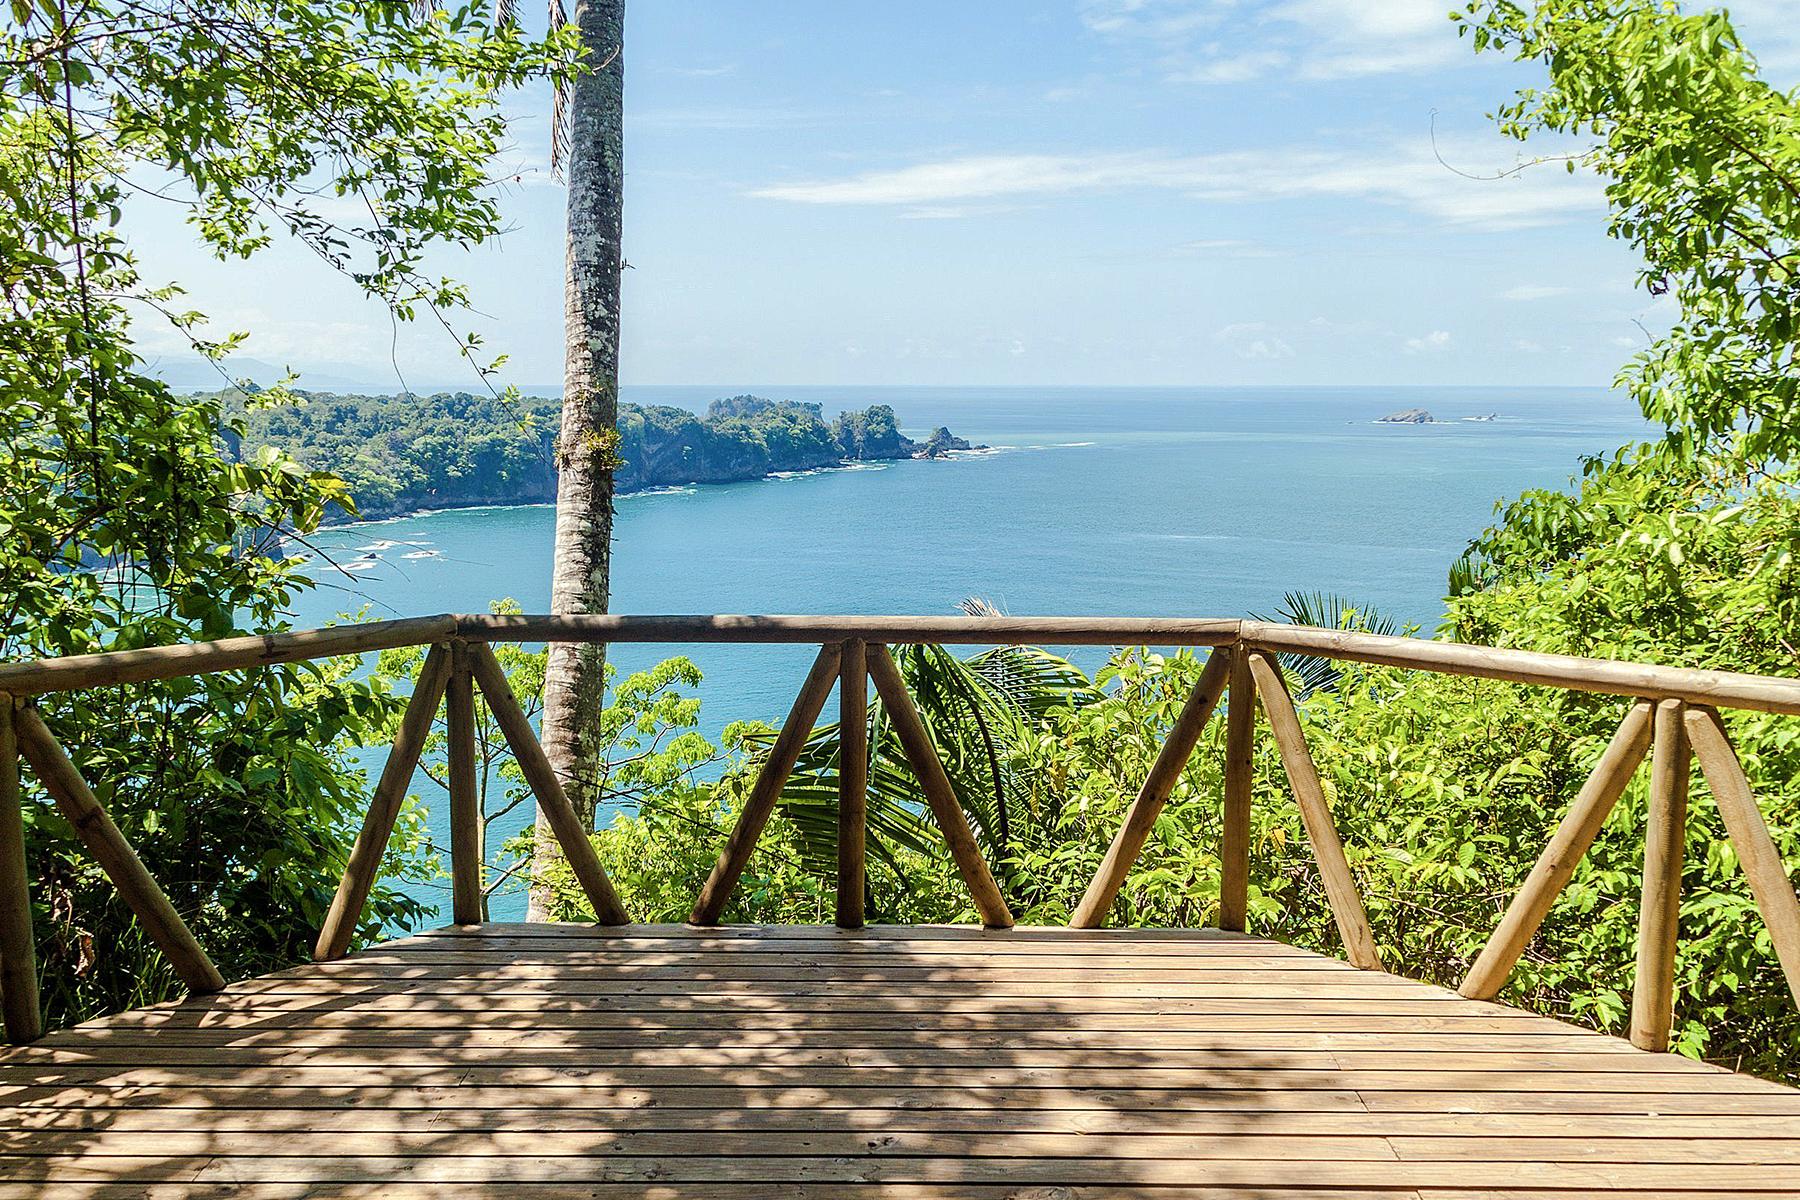 Best Things to See and Do in Costa Rica